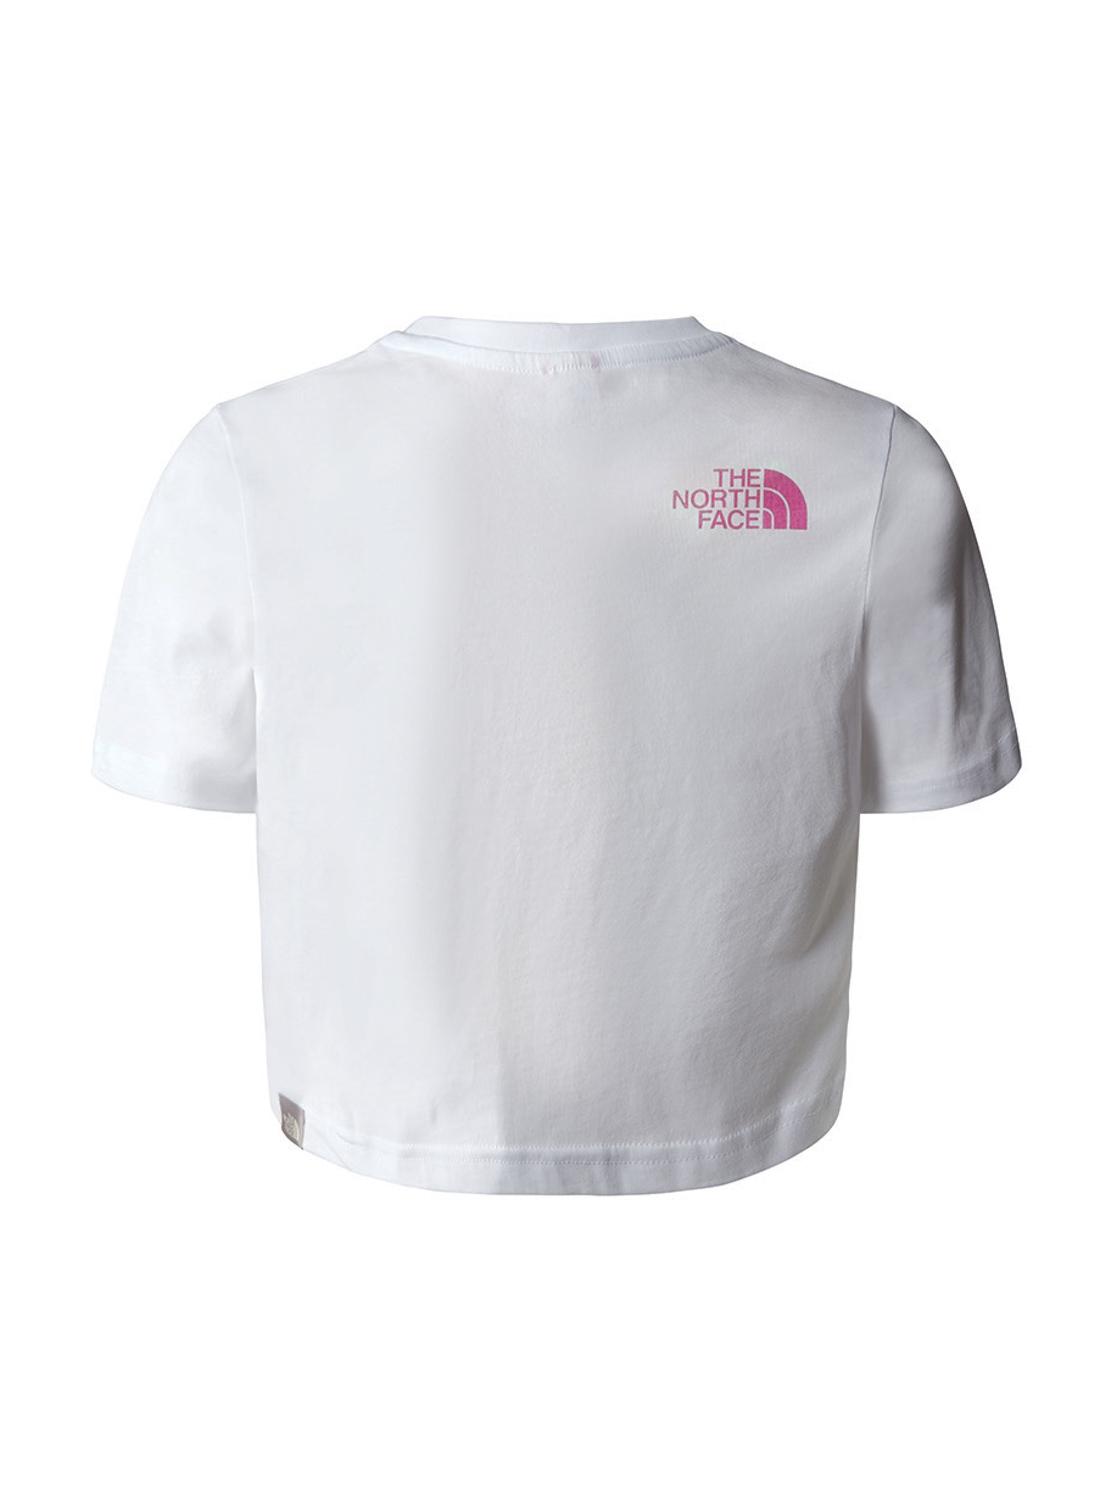 T-Shirt The North Face Easy Bianco per Bambina